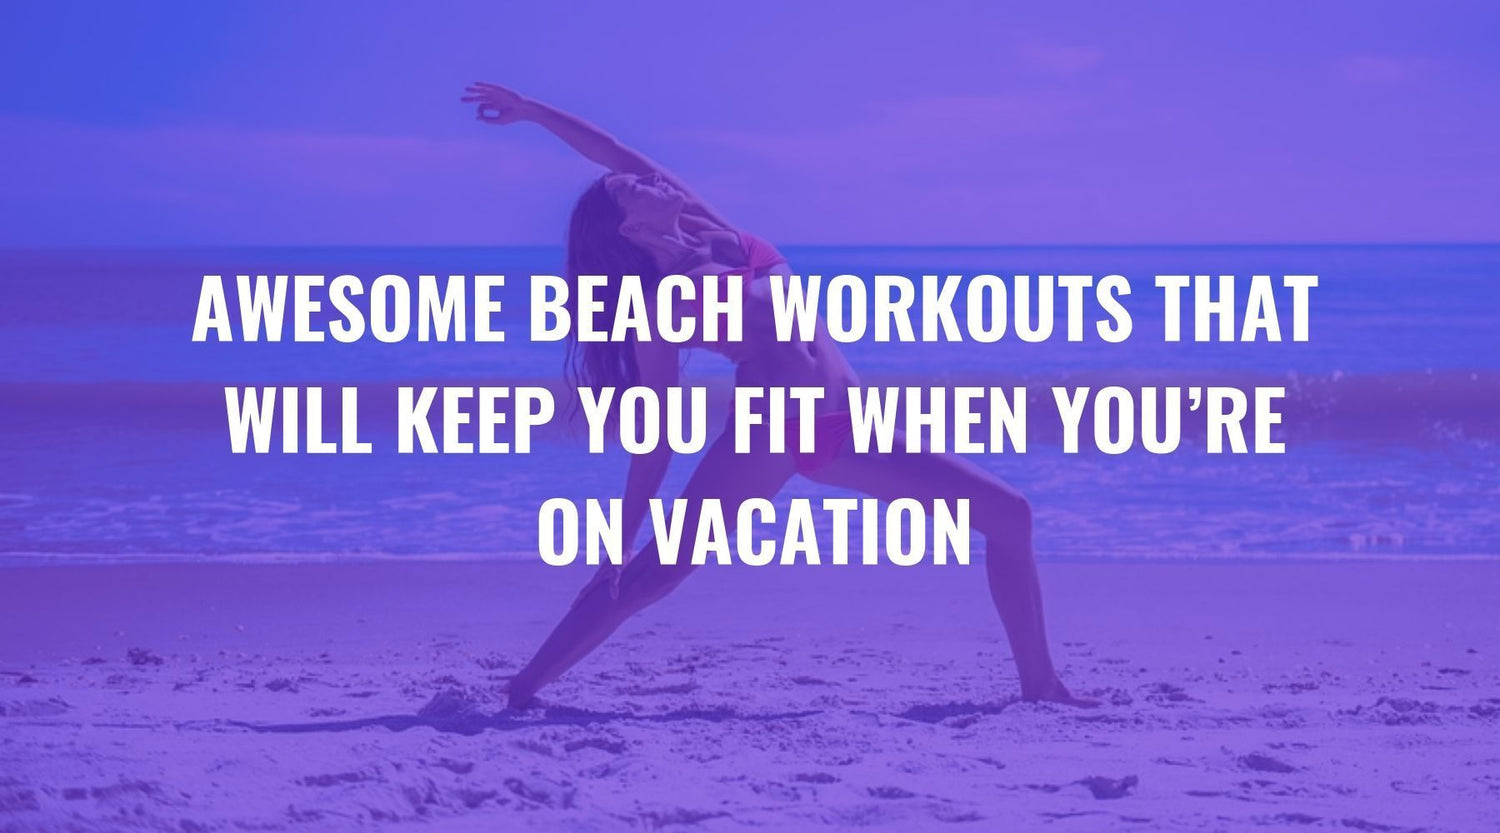 Awesome Beach Workouts That Will Keep You Fit When You’re on Vacation